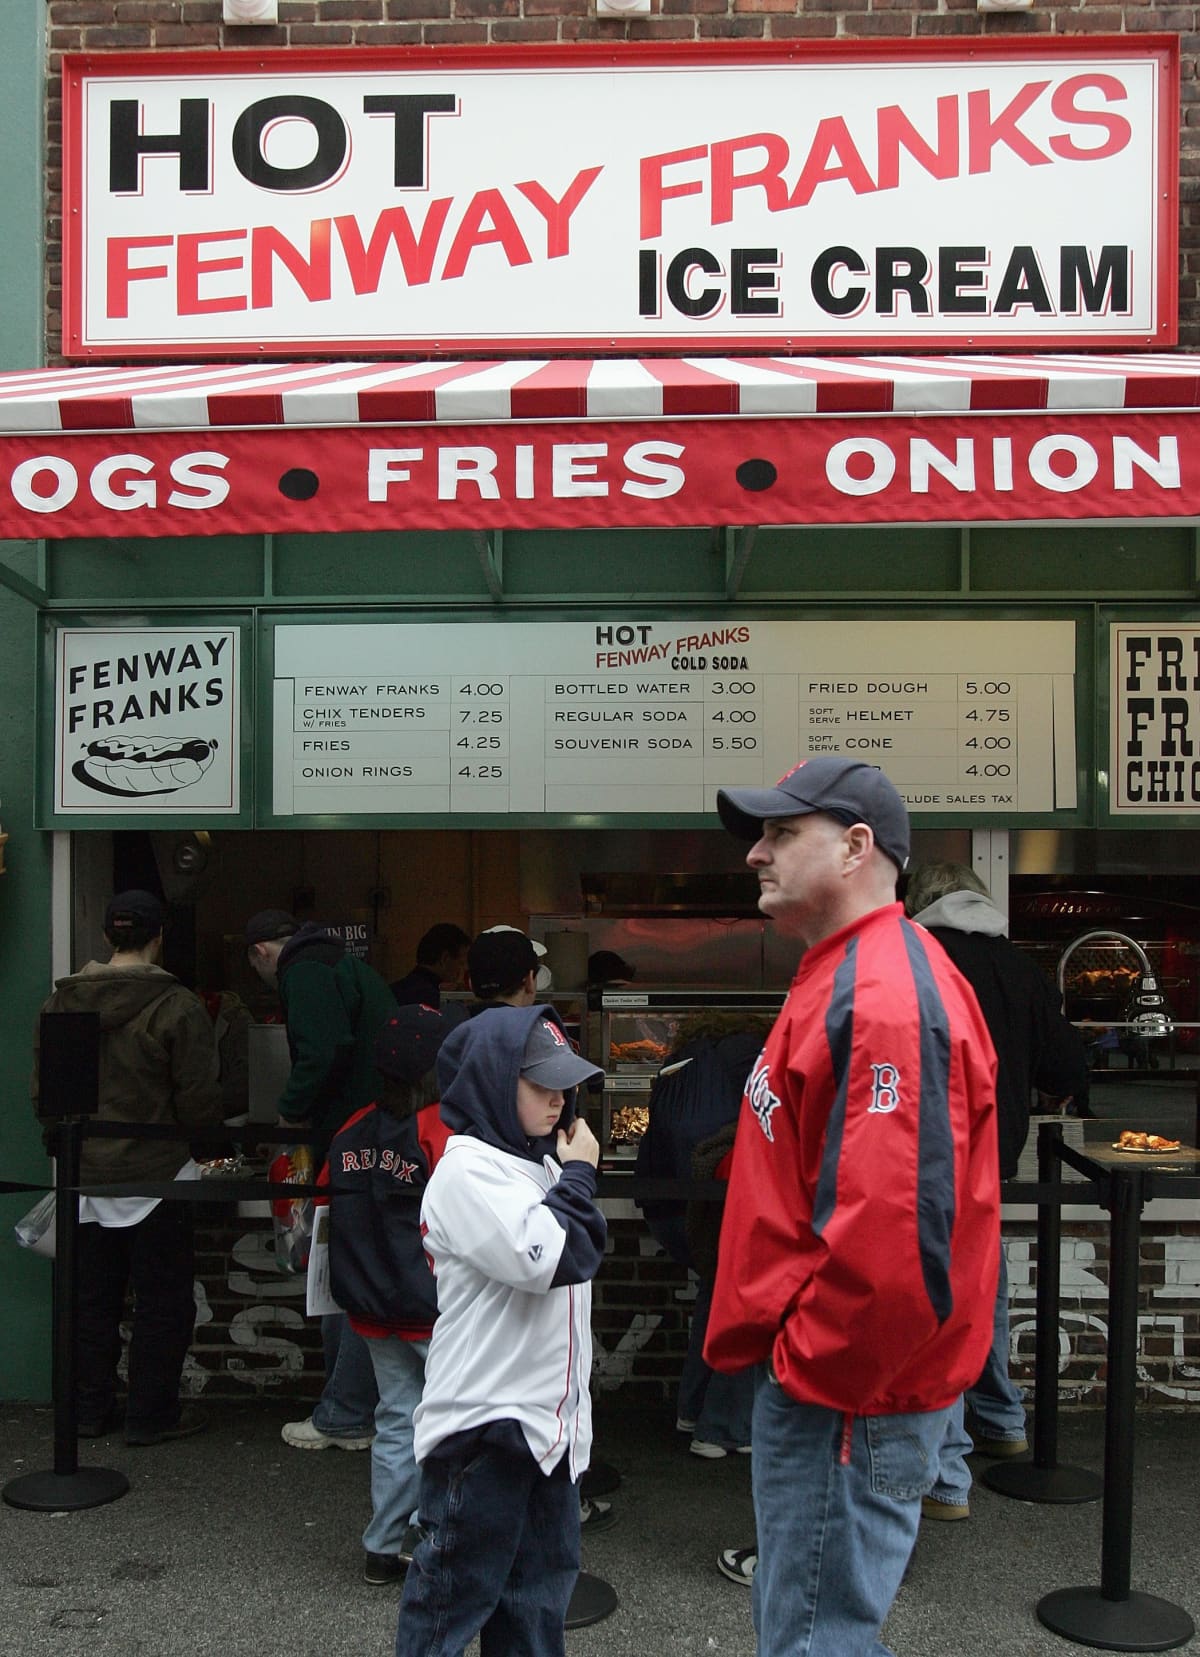 BOSTON - APRIL 10: A general view of Fenway Franks concession stand in Fenway Park taken during Opening day between the Boston Red Sox and the Seattle Mariners  on April 10, 2007 in Boston, Massachusetts. The Boston Red Sox defeated the Seattle Mariners 14-4. (Photo by Elsa/Getty Images)